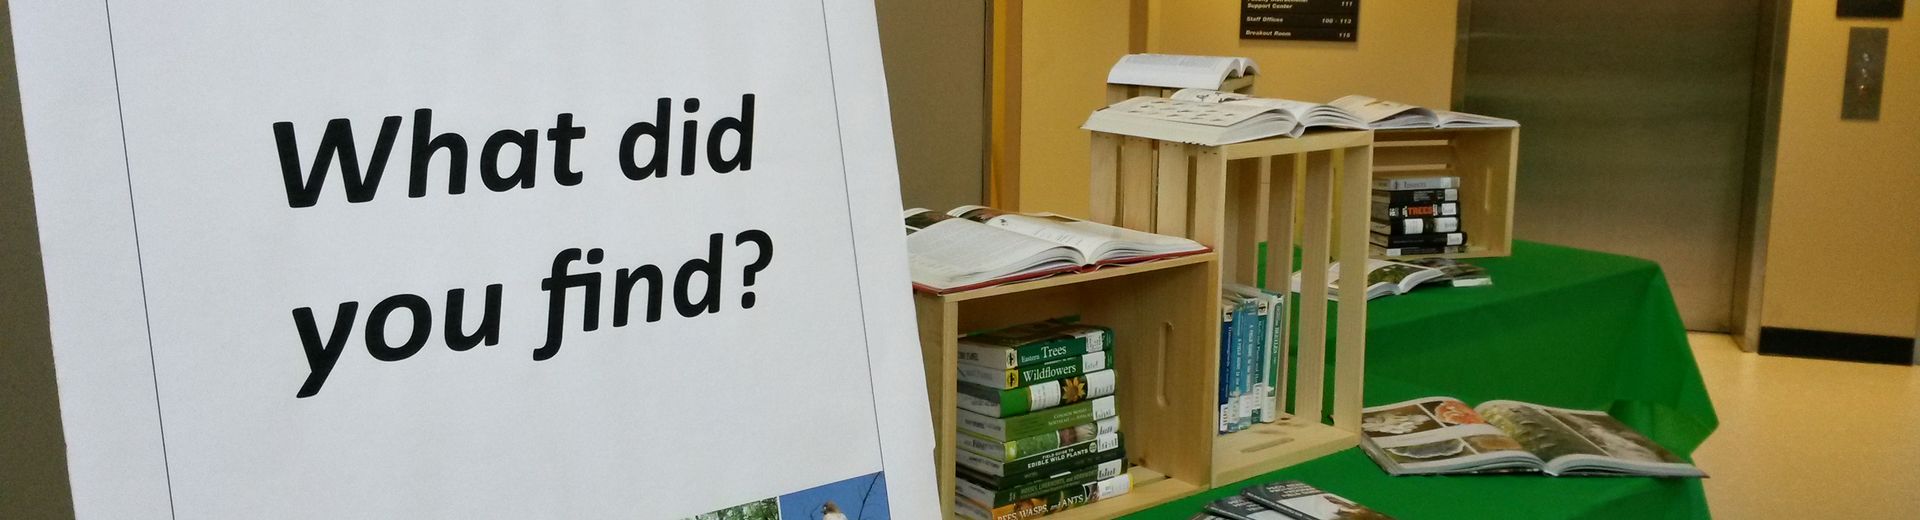 a sign in the library reading ' What did you find?'